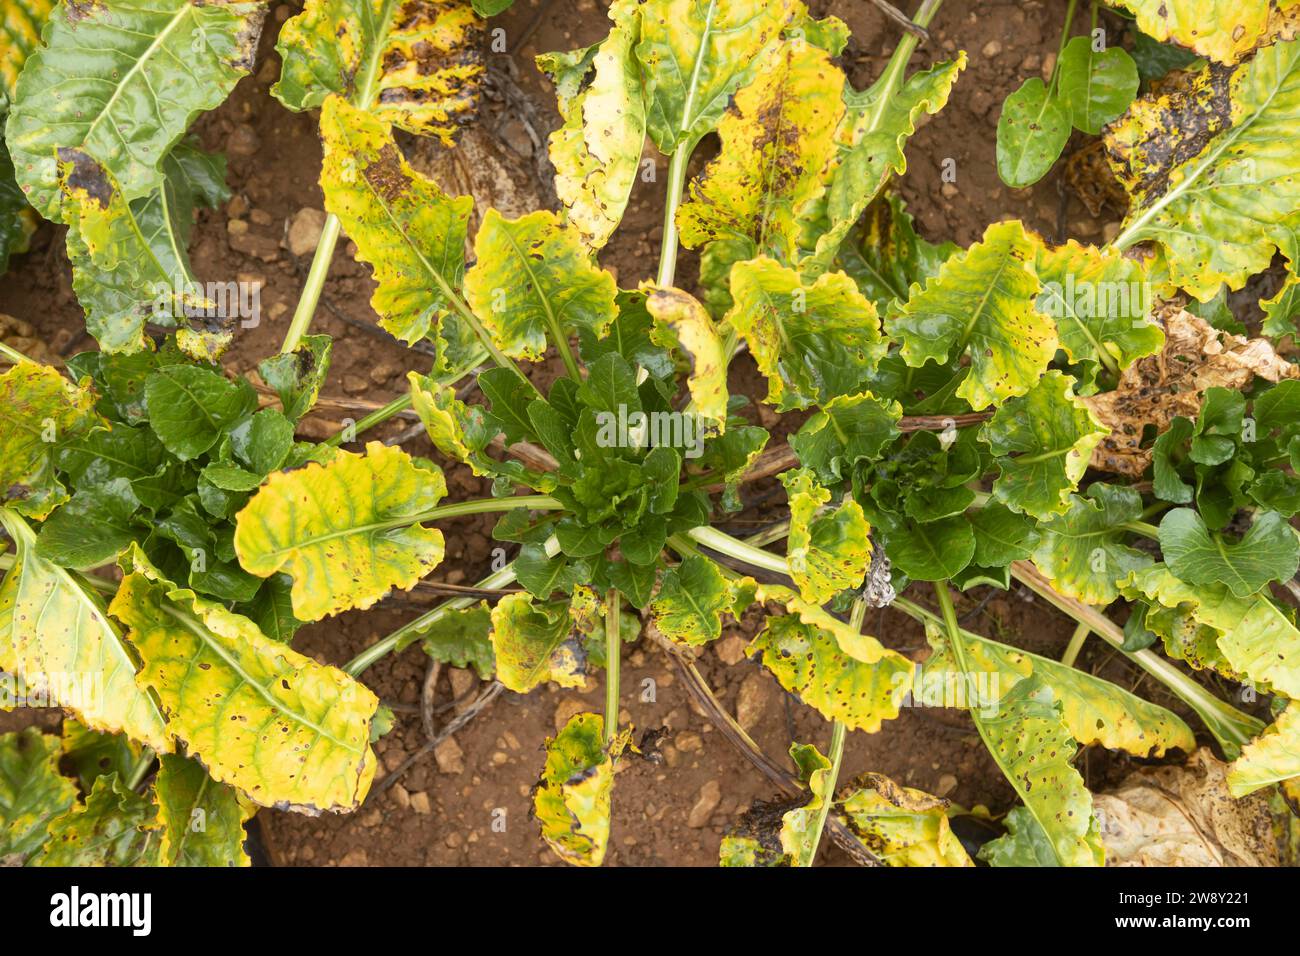 Sugar beet (Beta vulgaris) crop infected plants with virus yellows disease in an agricultural arable field, England, United Kingdom Stock Photo